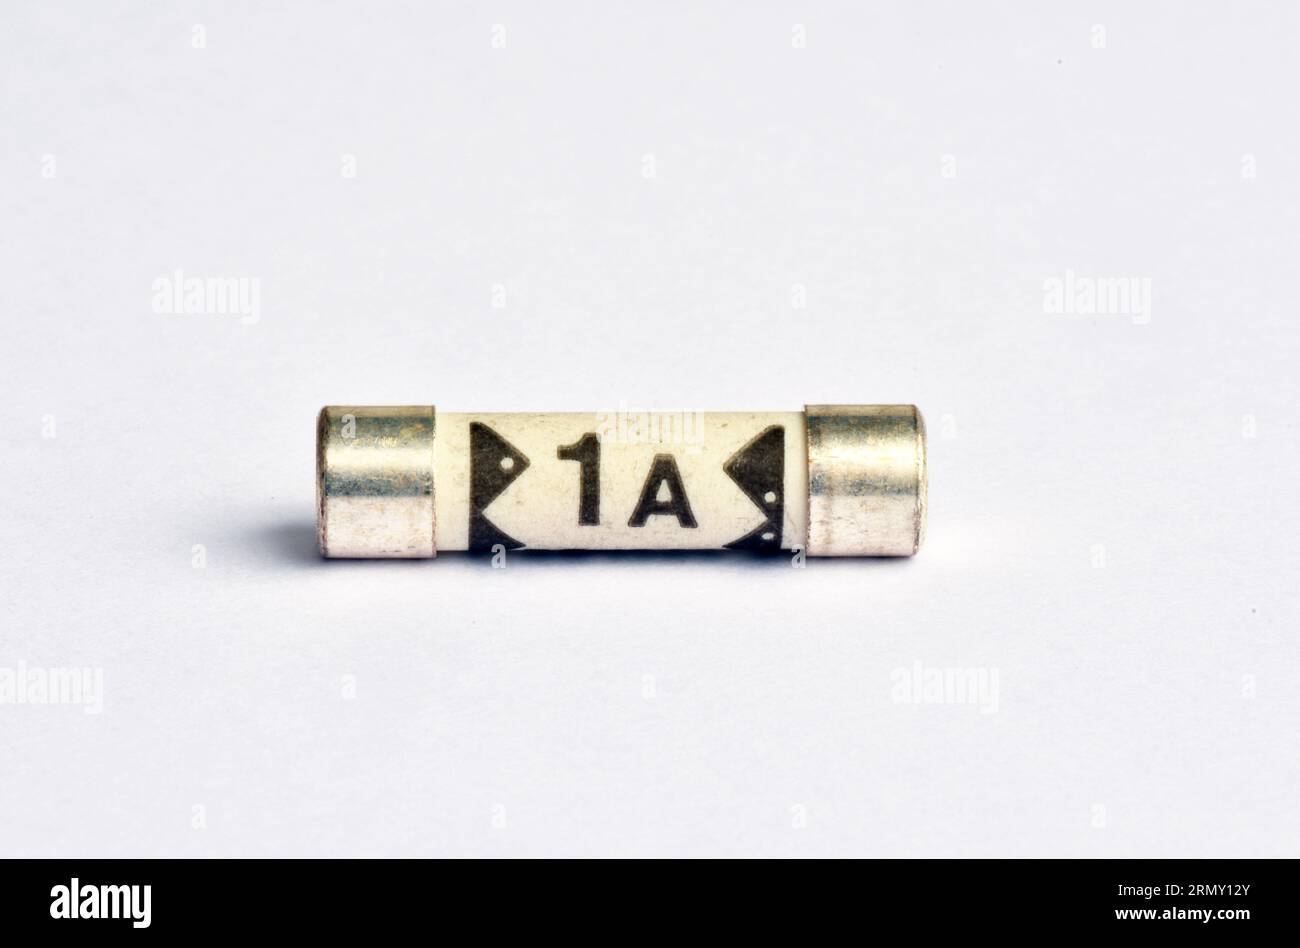 Plug top fuse to BS 1362.1"x 1/4" Ceramic bodied Fuse.1A shown. Stock Photo